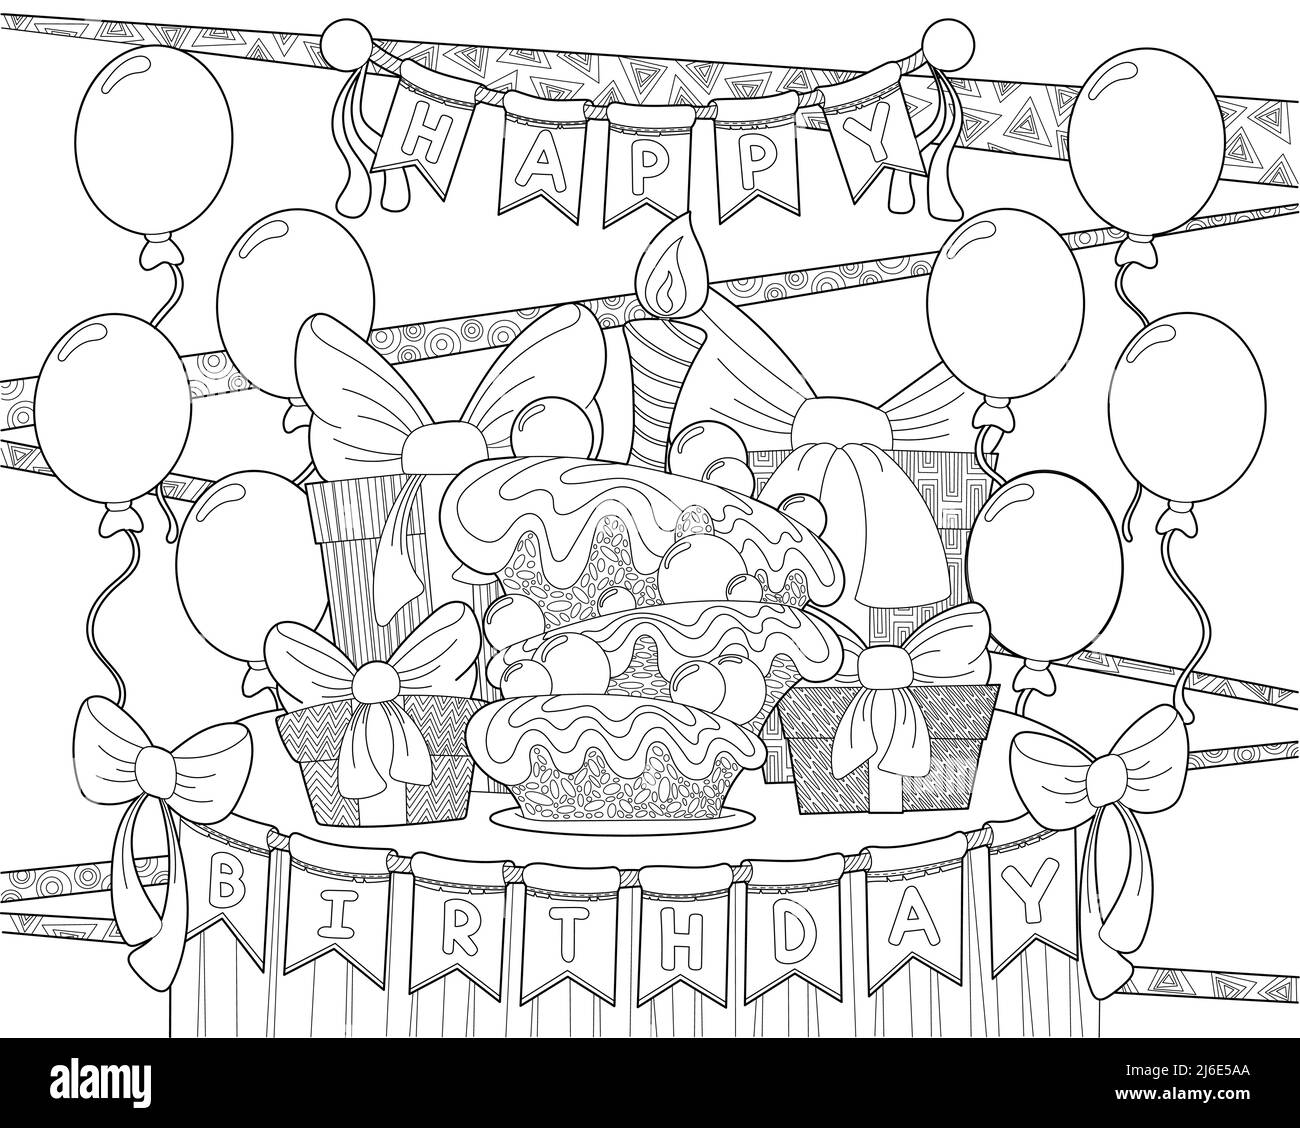 happy-birthday-coloring-page-coloring-poster-in-doodle-style-stock